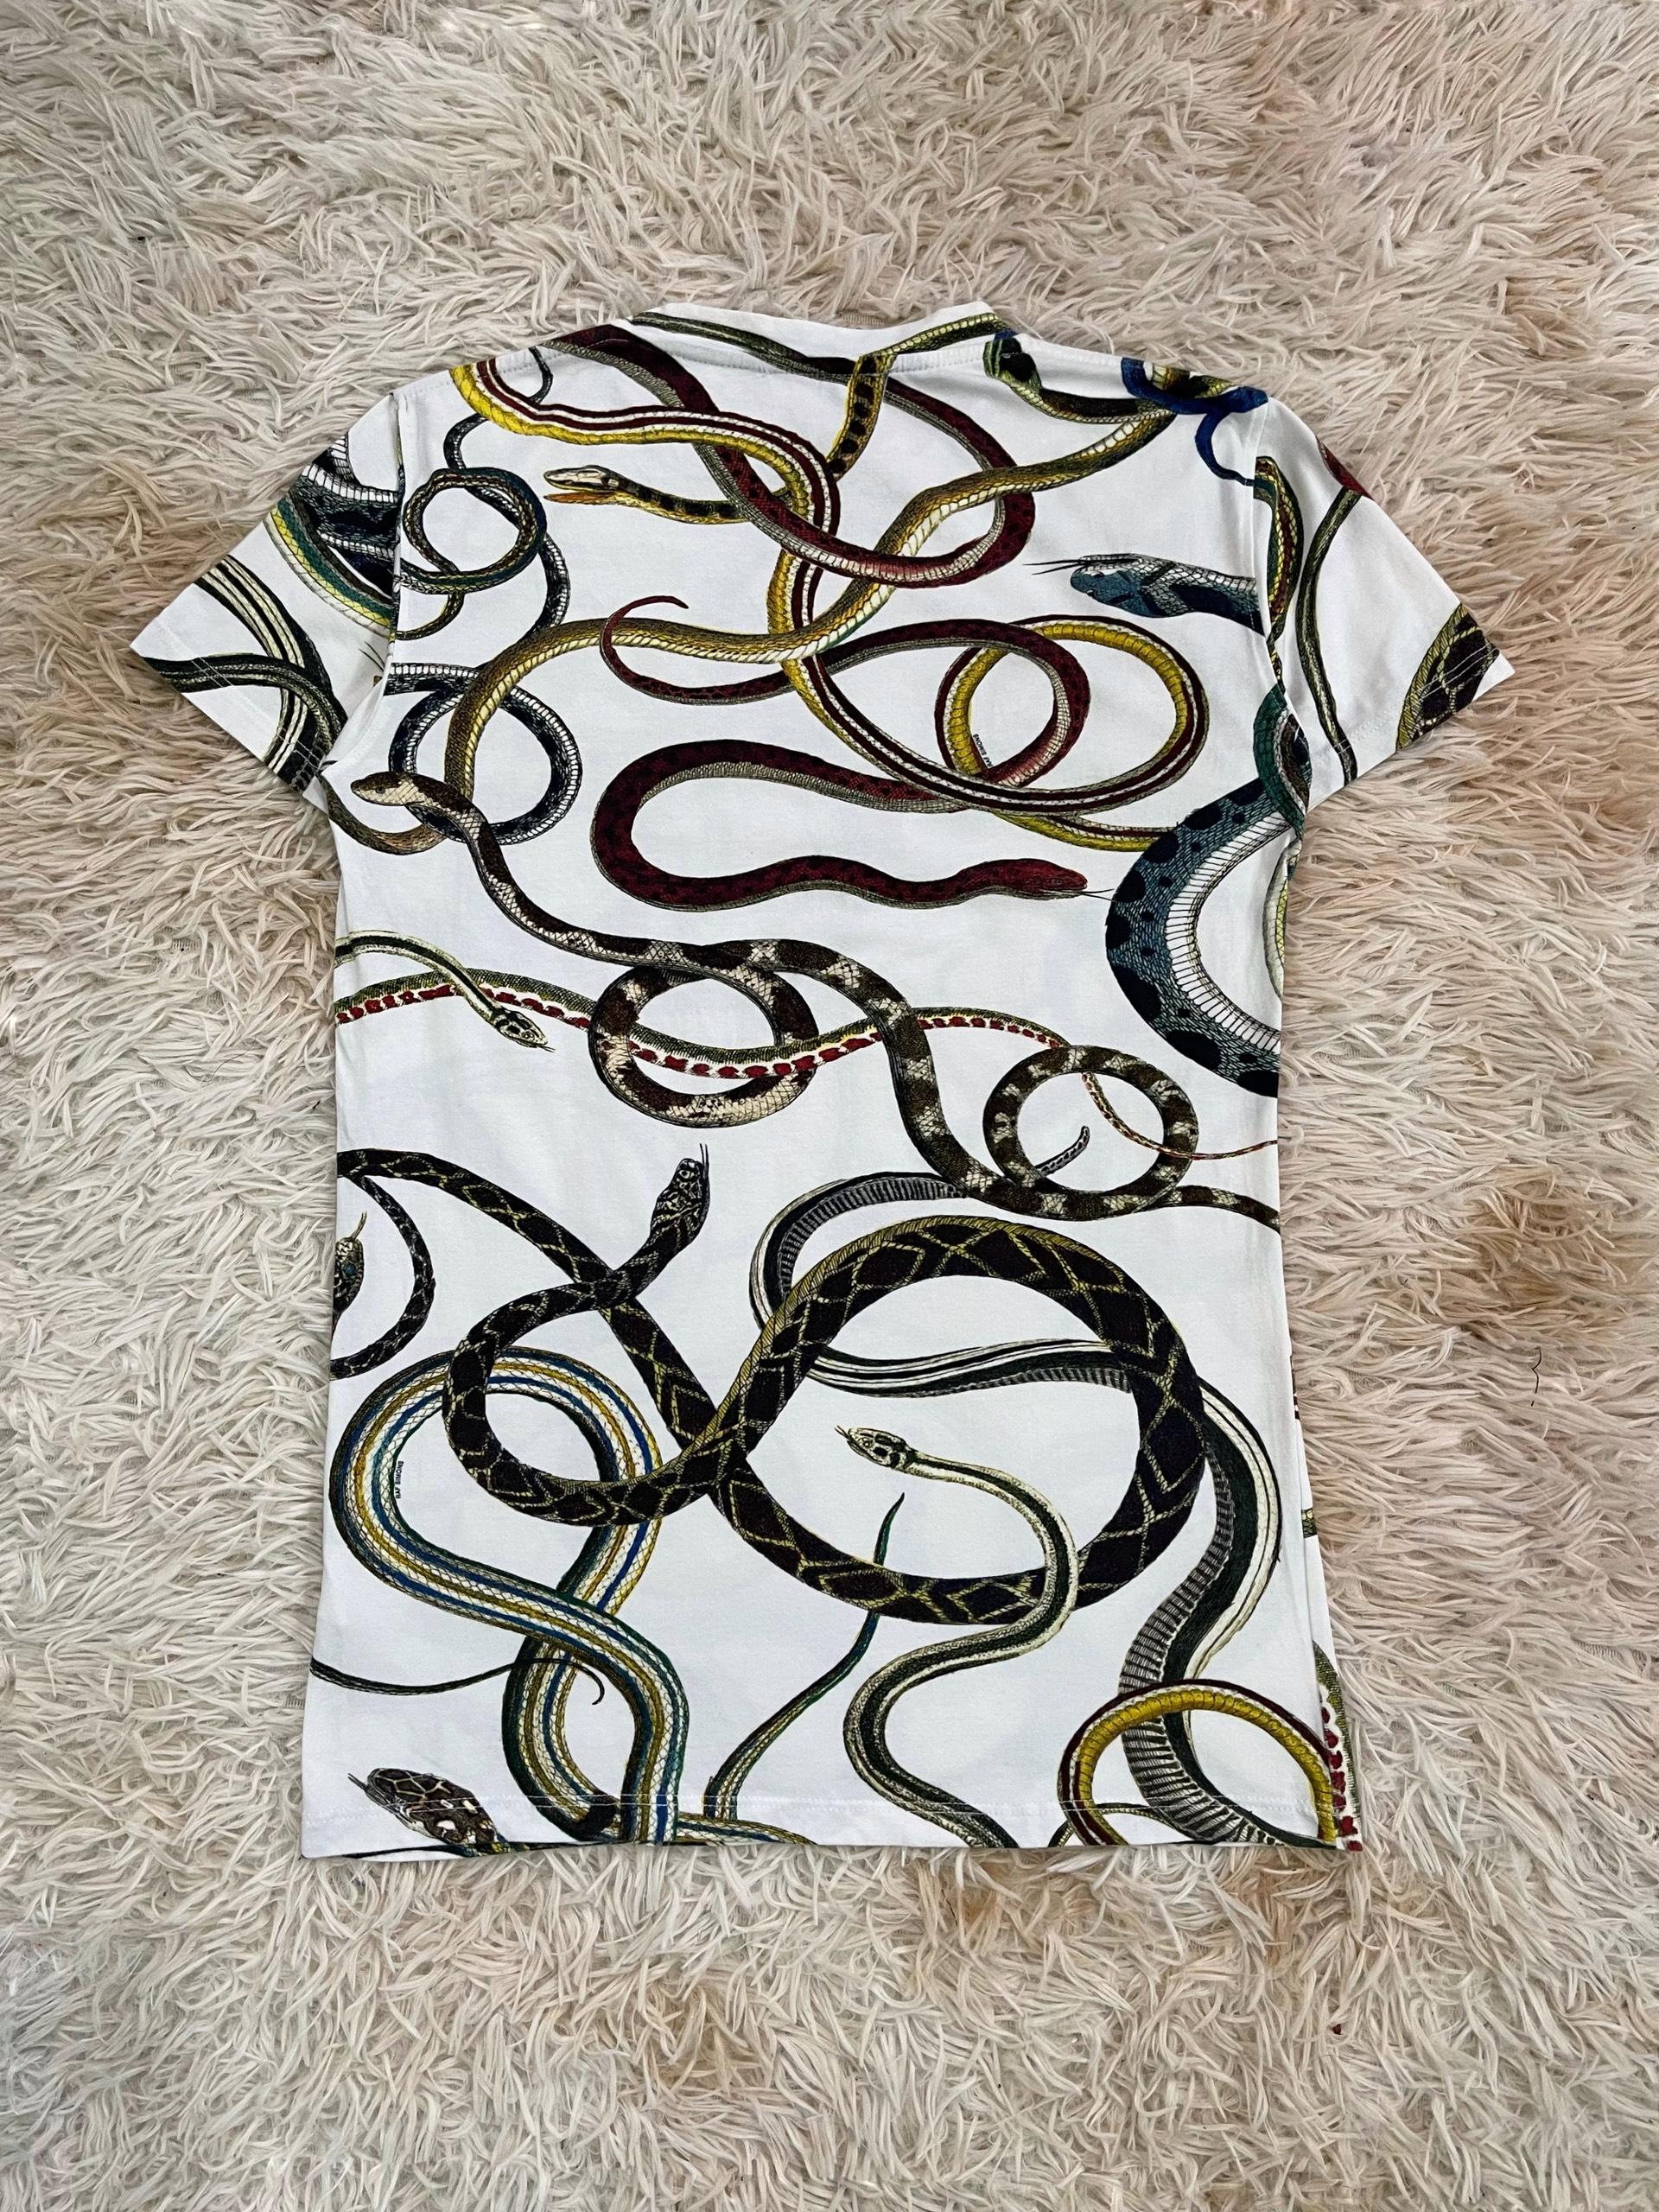 Raf Simons S/S2010 Snakes T-Shirt In Excellent Condition For Sale In Seattle, WA